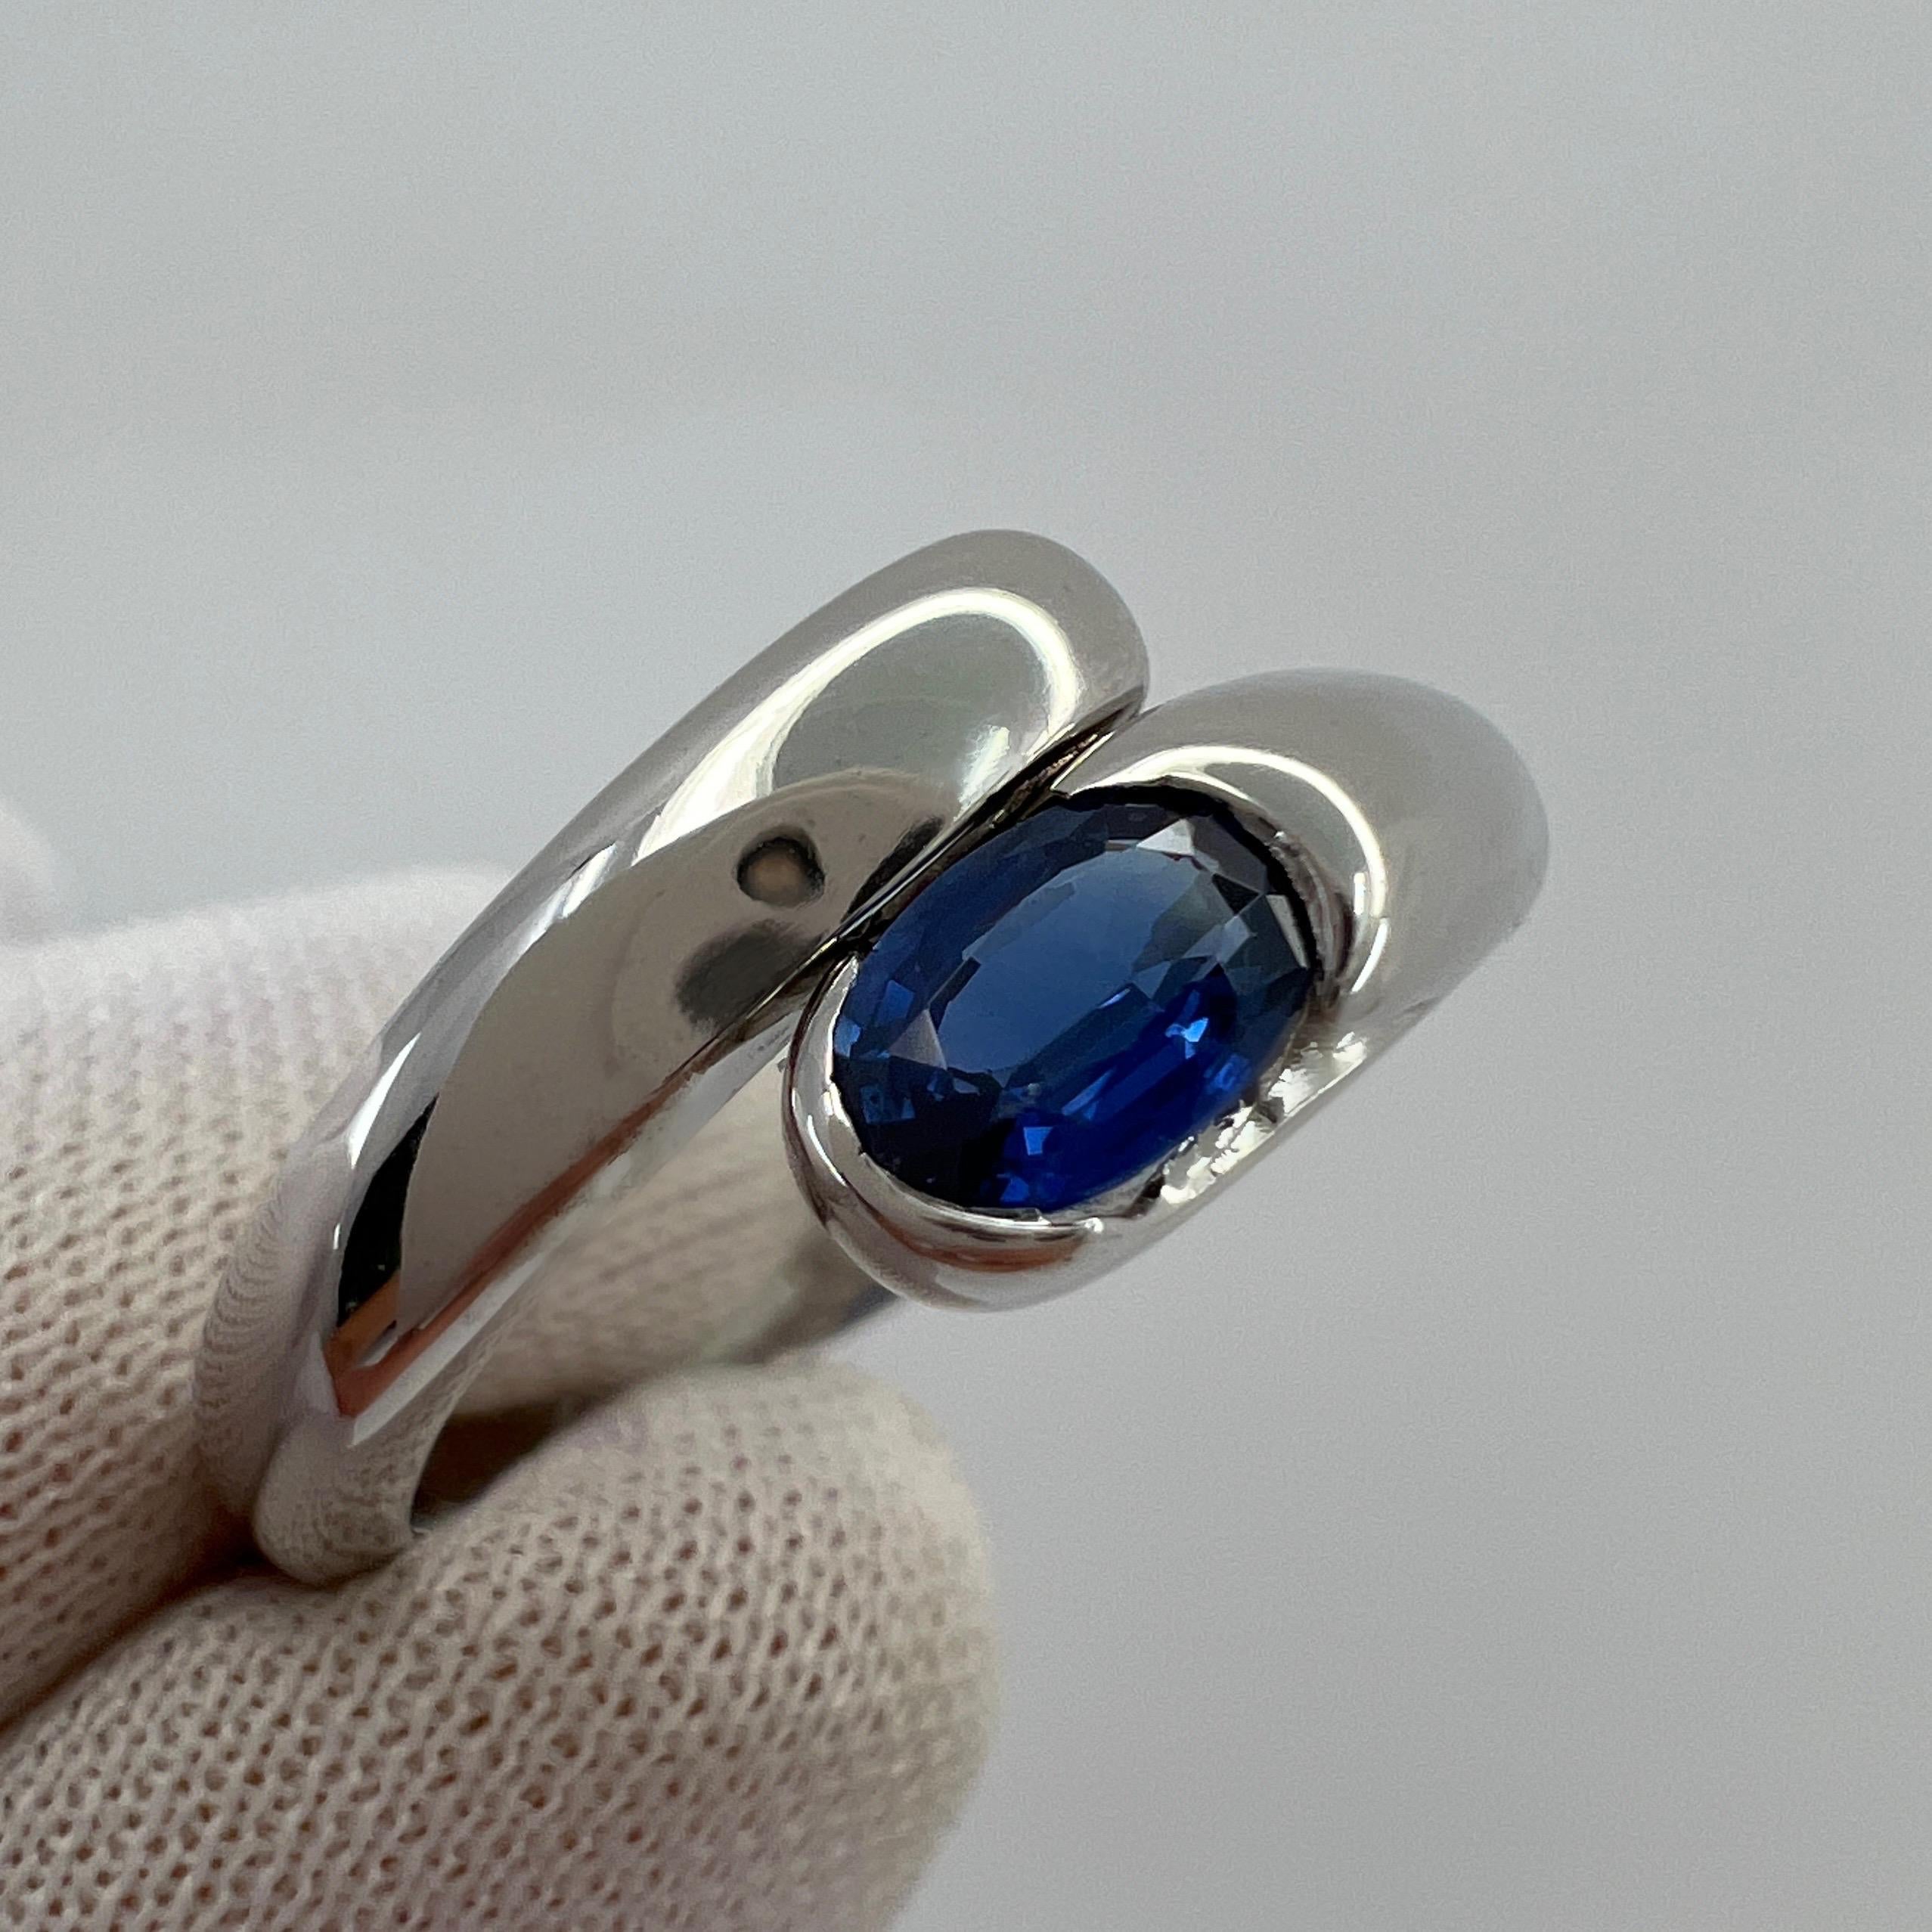 Vintage Bvlgari Astrea Oval Cut Blue Sapphire 18k White Gold Bypass Ring.

The classic Bvlgari snake theme from the more modern Astrea line, this 18k white gold bypass ring wraps comfortably around the finger. 

The ring is set with a beautiful oval